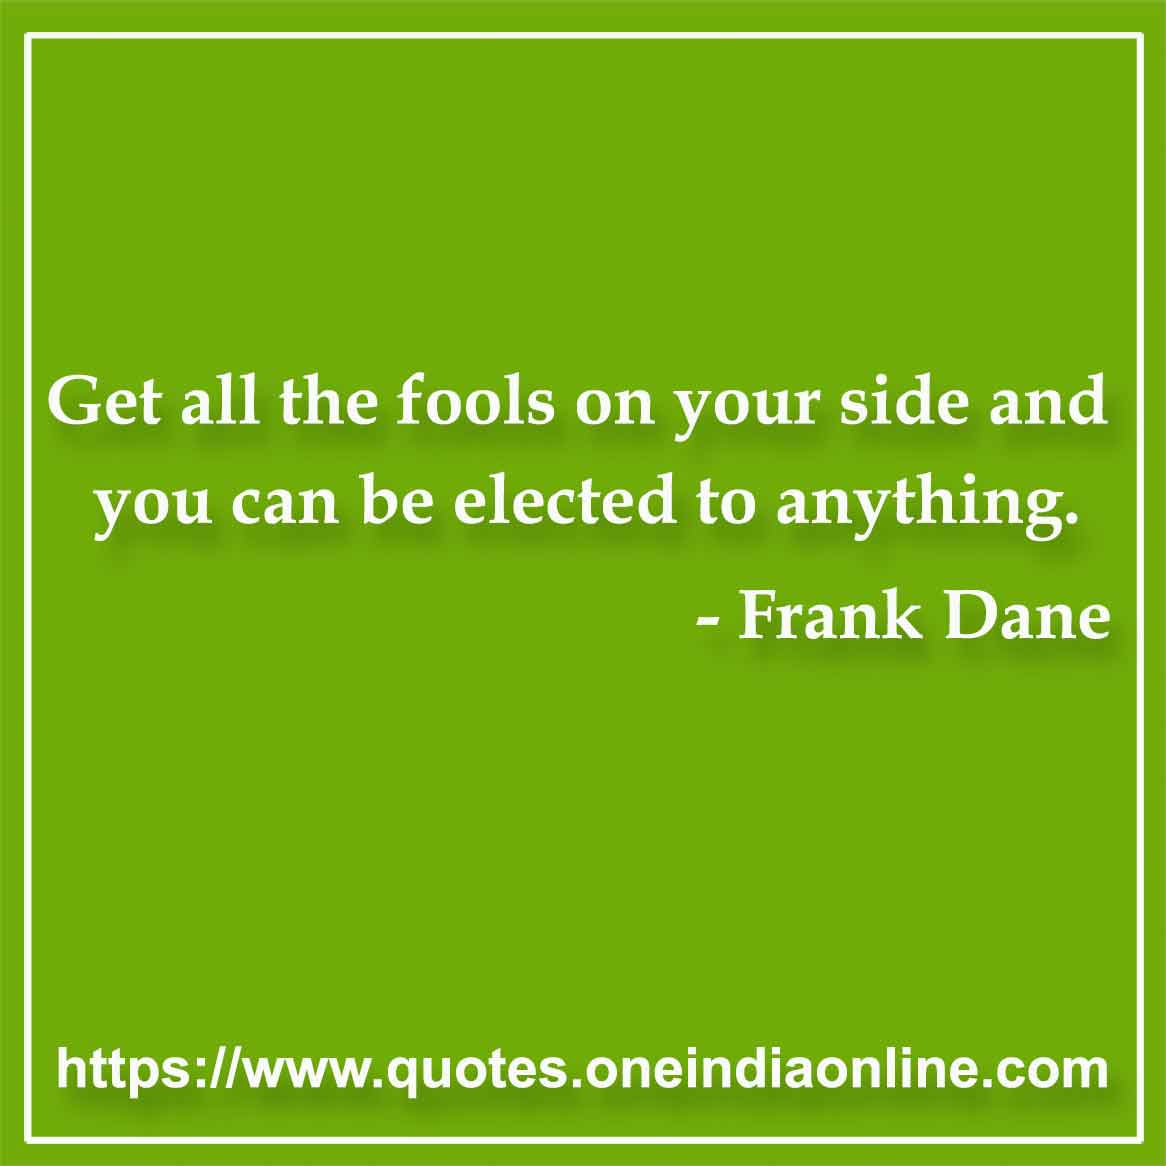 Get all the fools on your side and you can be elected to anything.

- Stupid Quotes by Frank Dane 